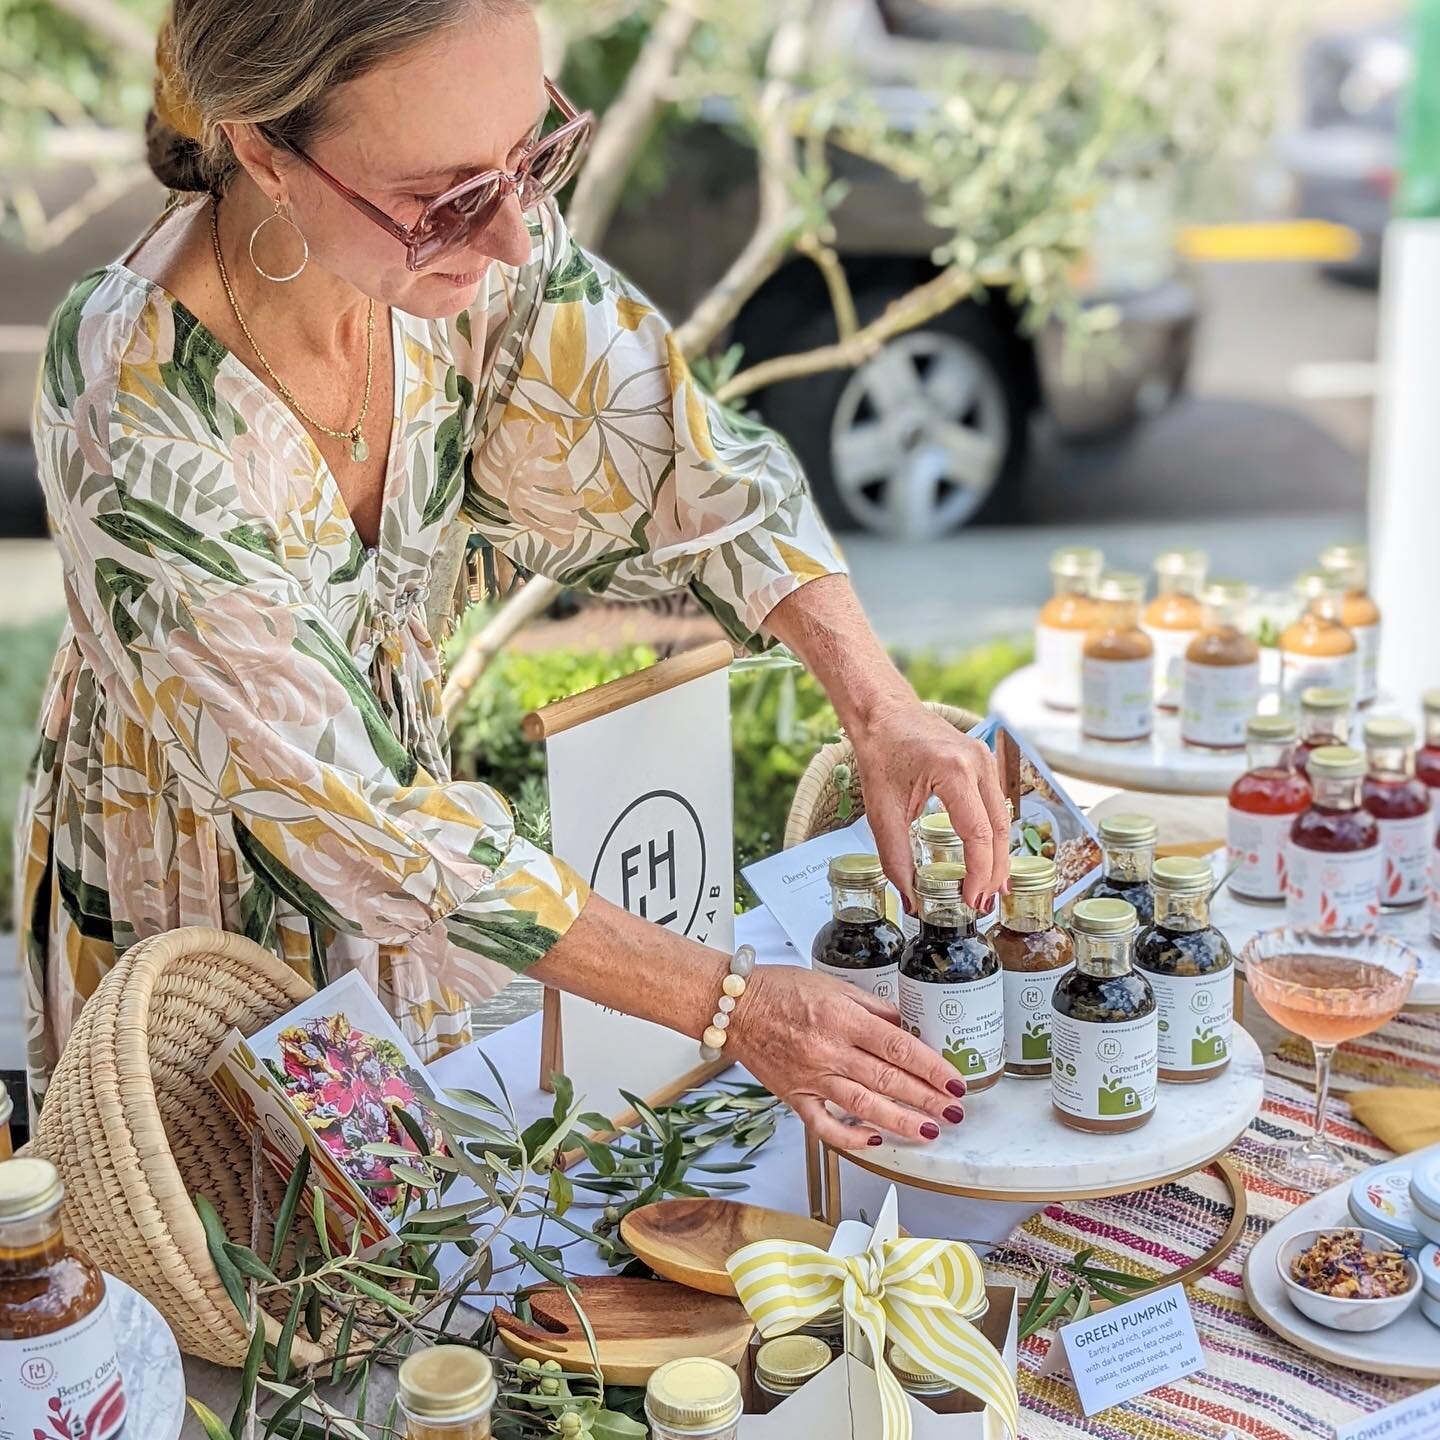 The Summer Swing Event this Saturday at the @lark_creek_shops was so fun! Thank you to everyone who came to visit 💚 We loved seeing and sharing recipe ideas with you!

If you did not have a chance to swing by, we still have a 20% off promo running u